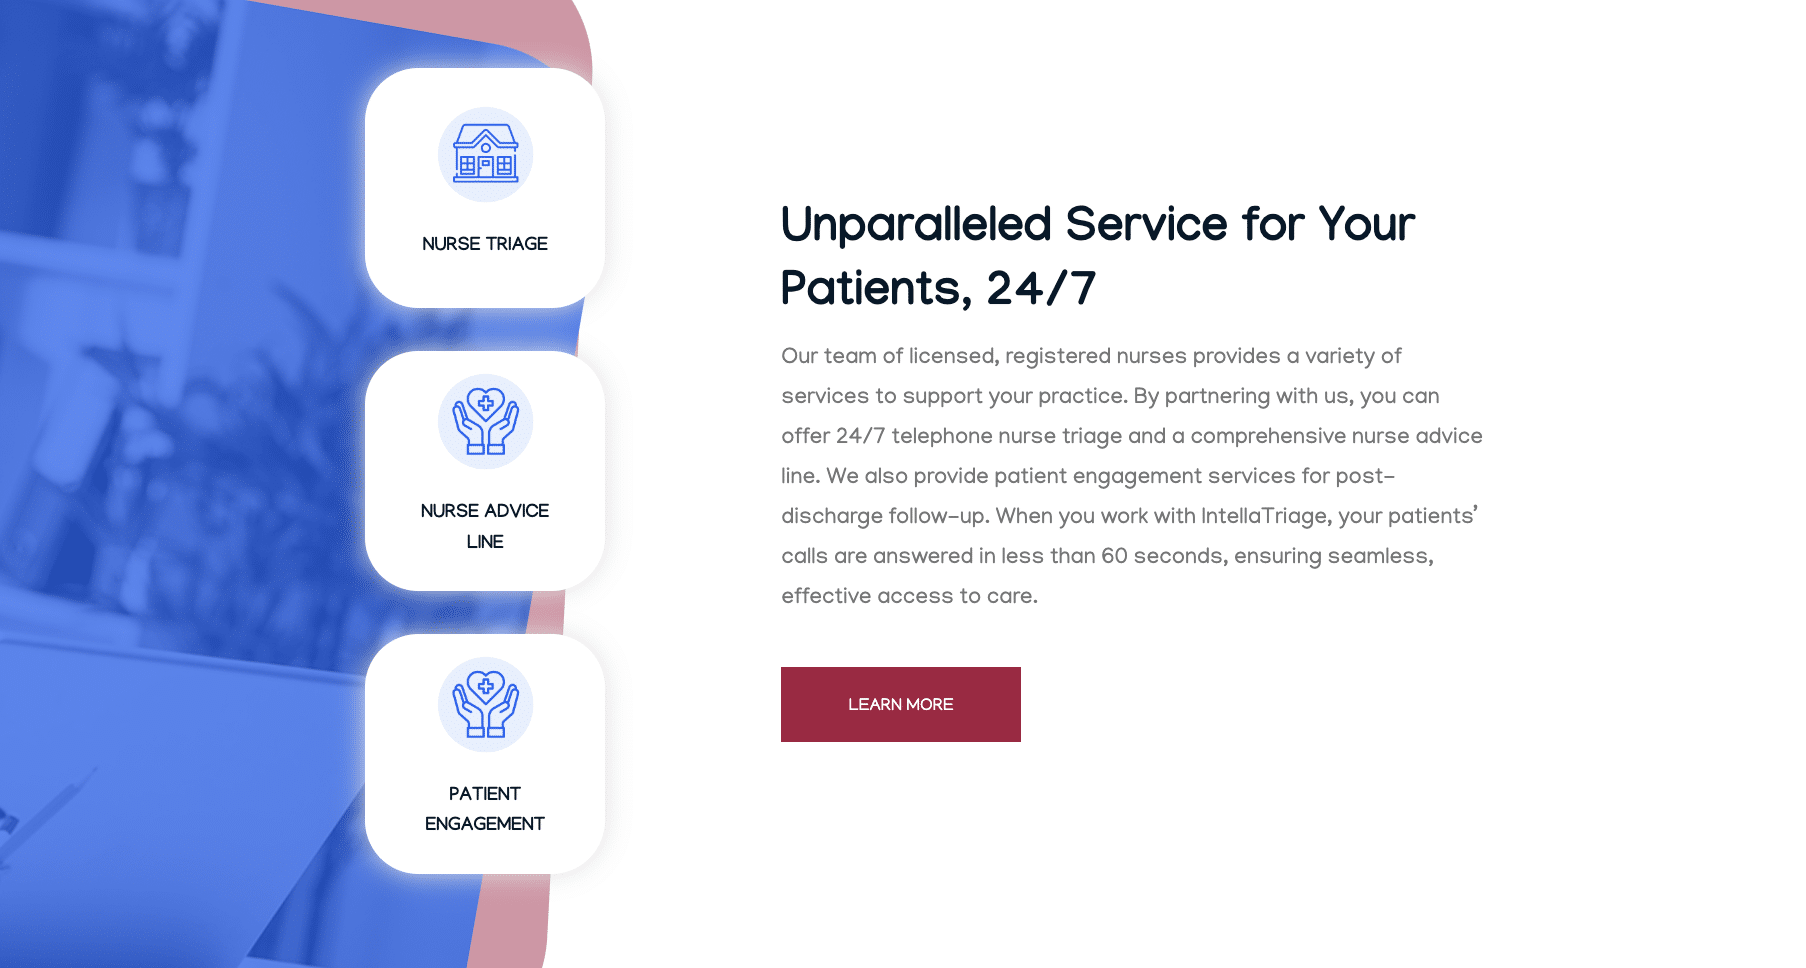 Unparalleled Service for Your Patients, 24/7 webpage content from the IntellaTriage website.